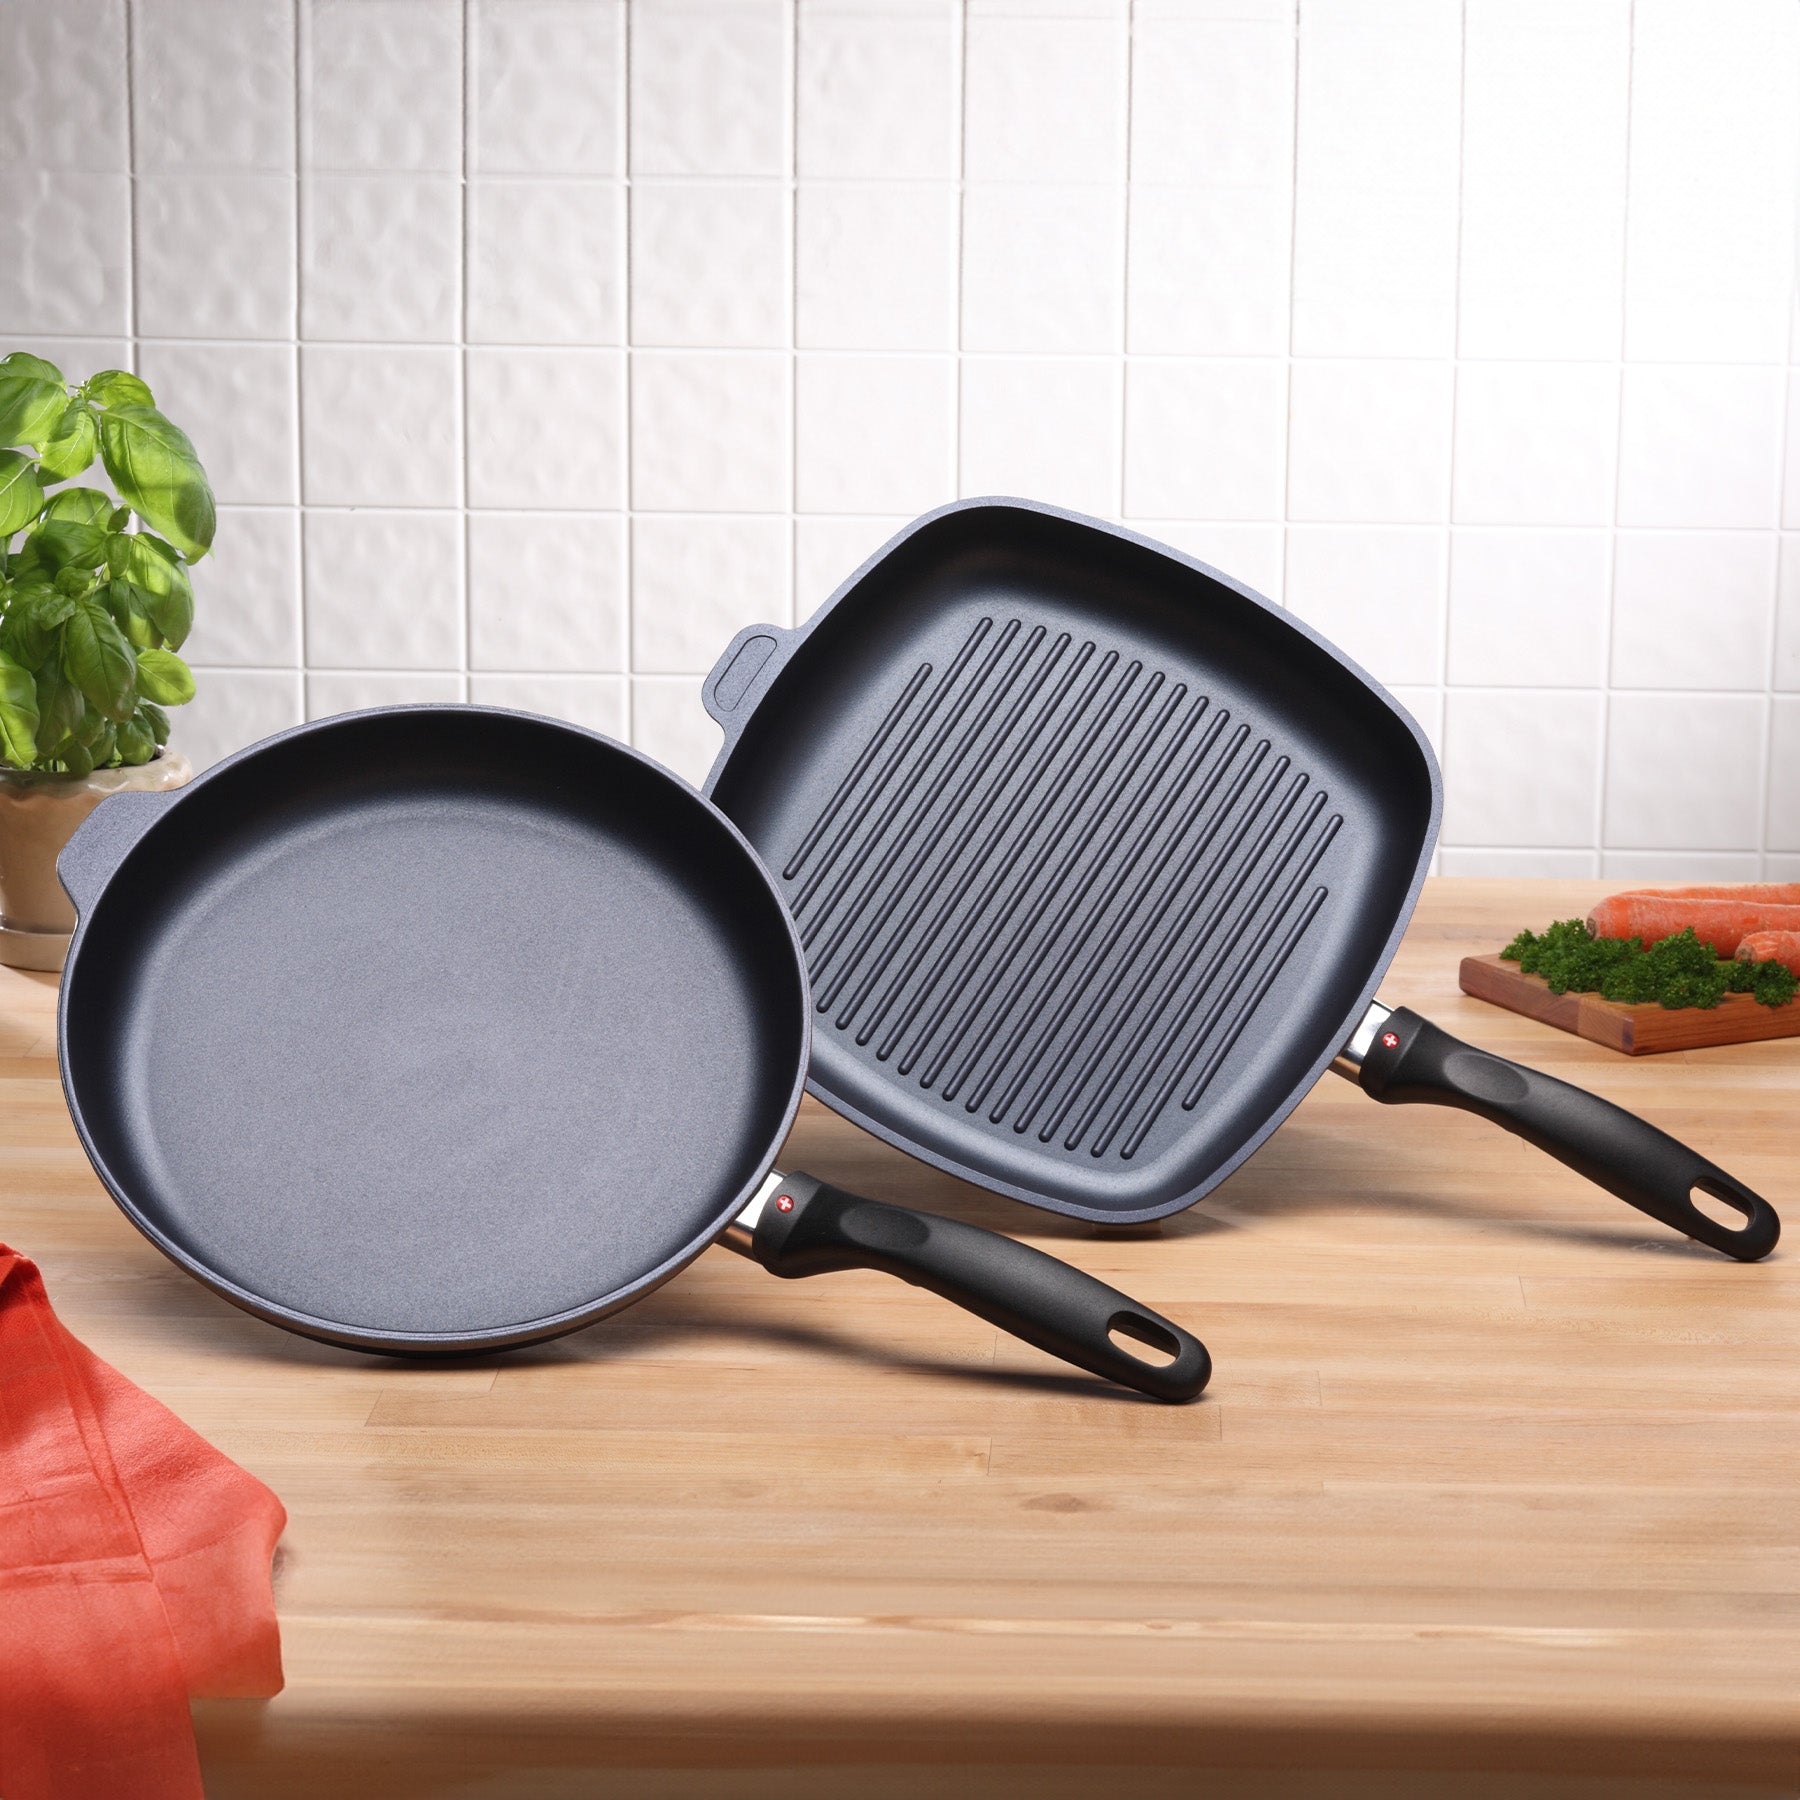 HD Nonstick 2-Piece Set - Fry Pan & Grill Pan - Induction in use on kitchen counter